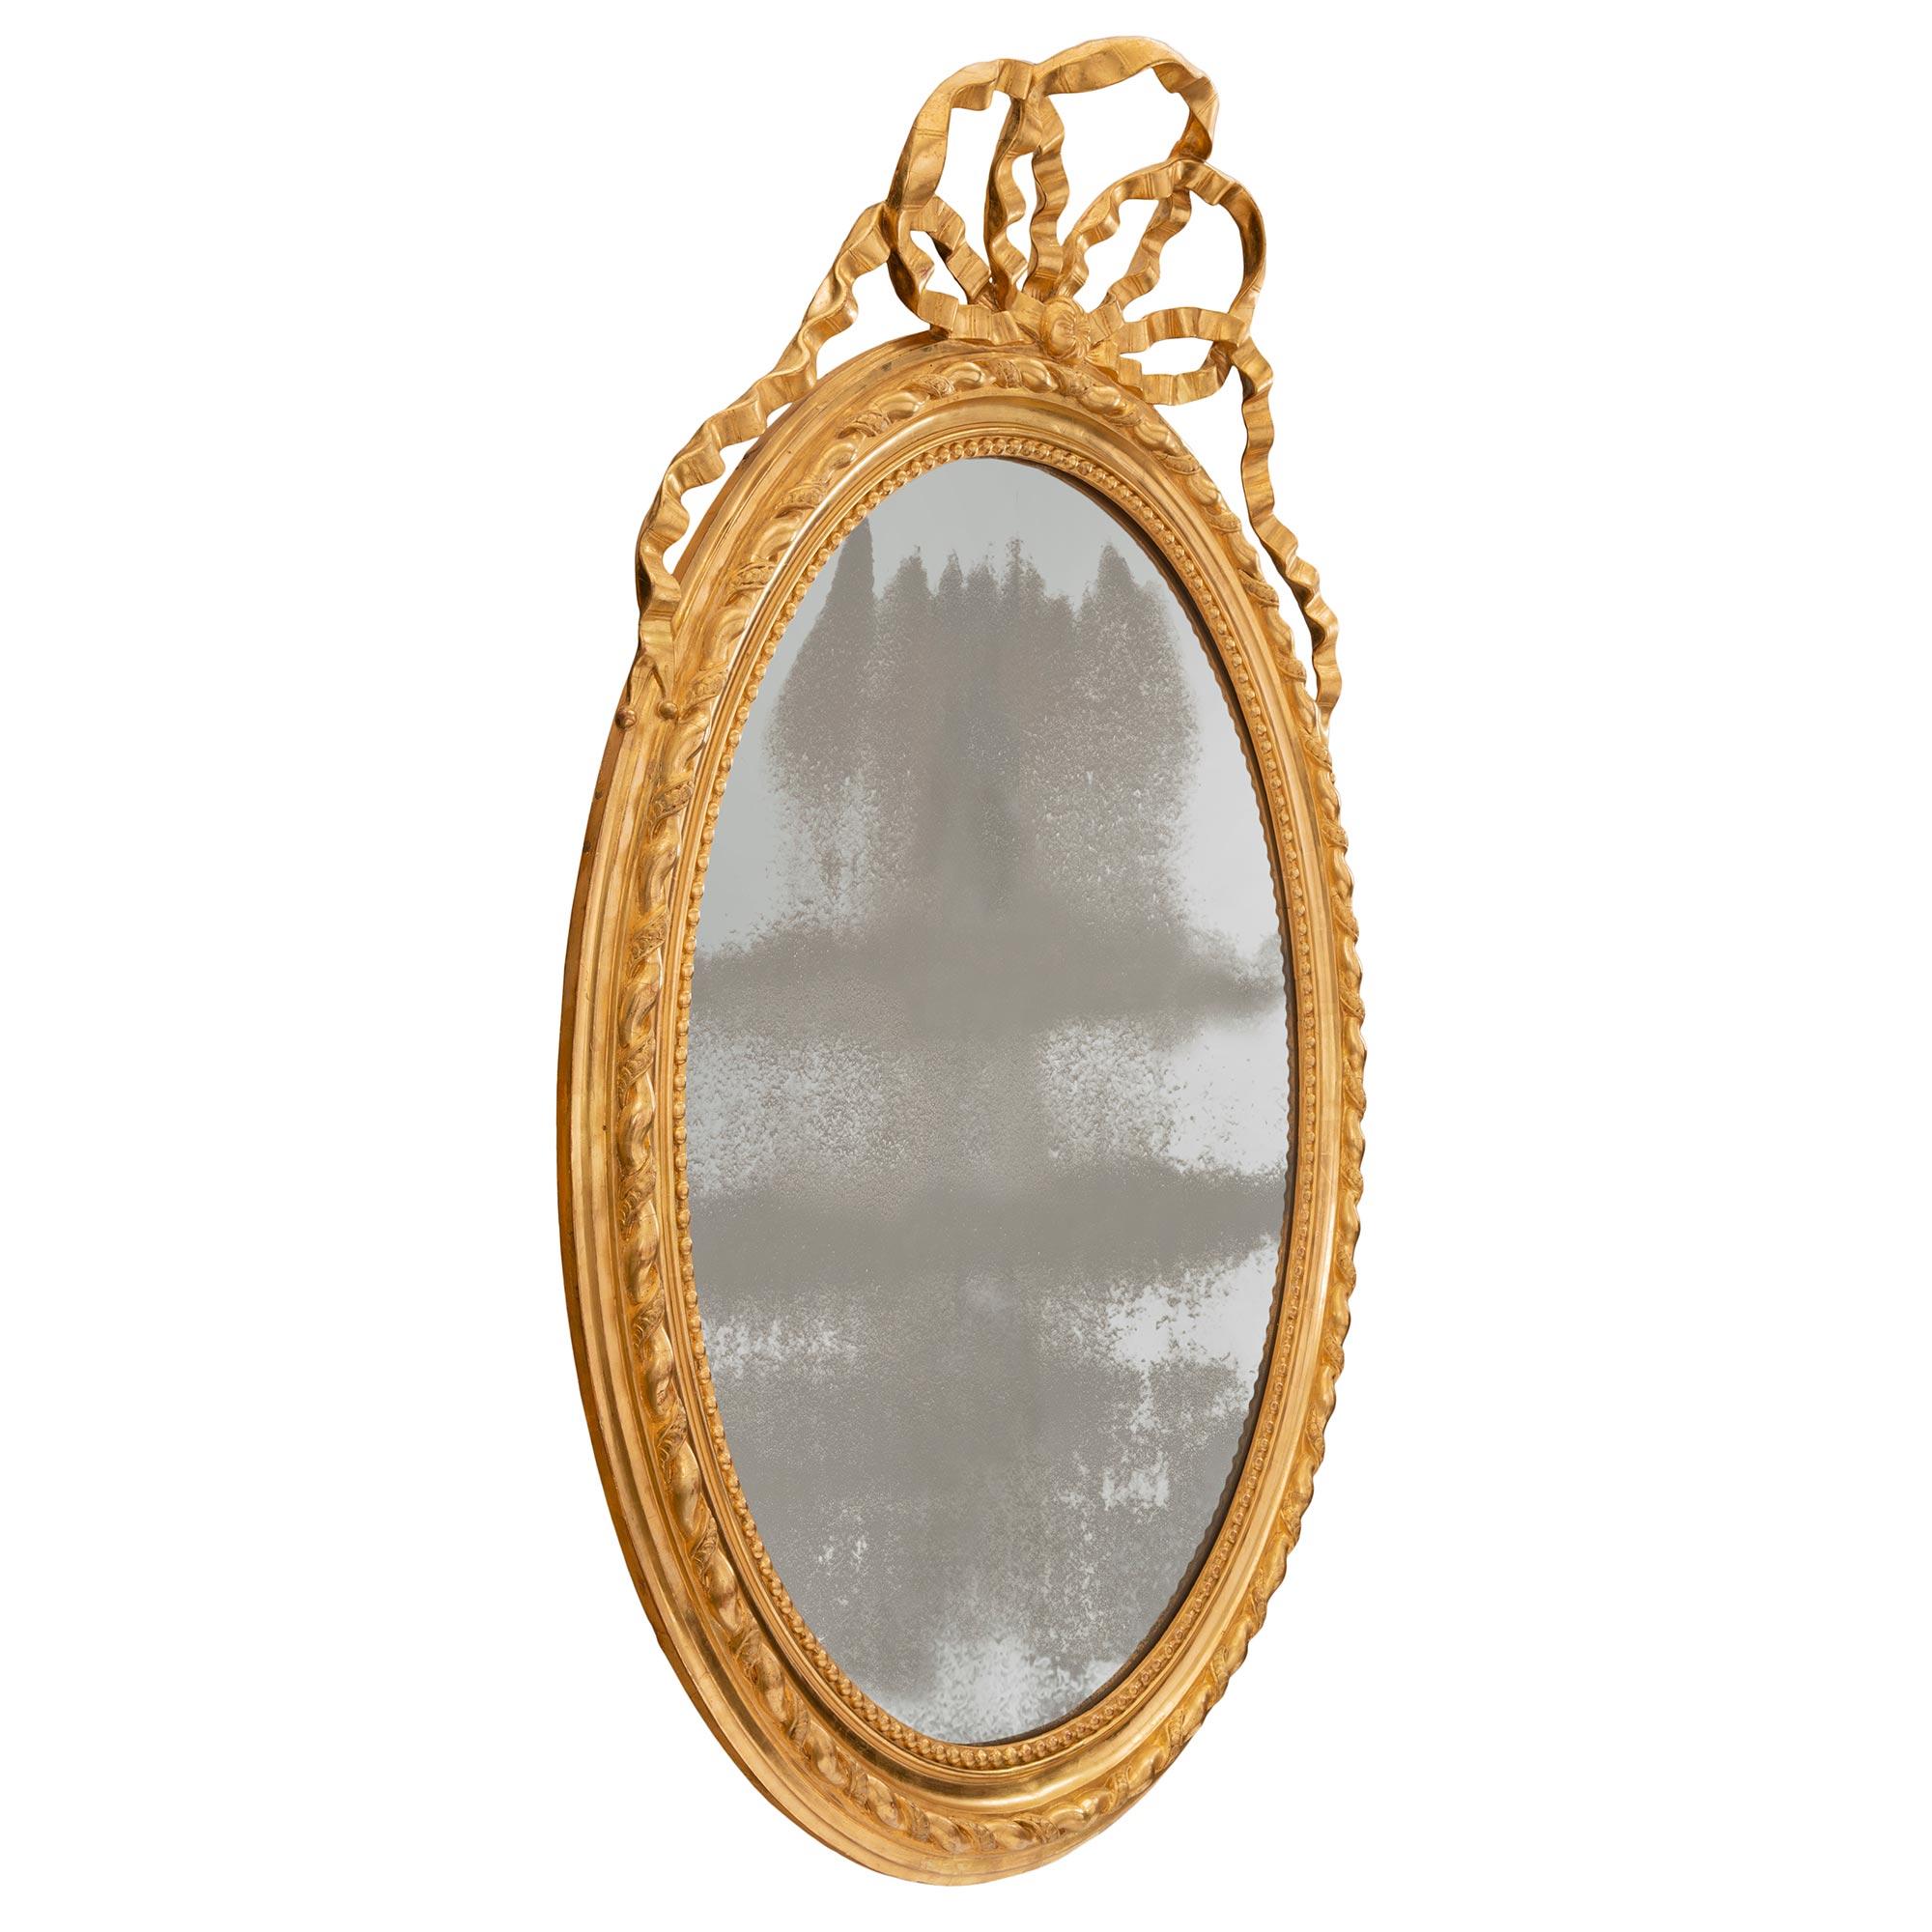 A most elegant French 19th century Louis XVI st. oval giltwood mirror. The original mirror plate is framed within a lovely beaded mottled border. At the edge is a fine twisted design which extends throughout the frame. Above is a beautiful and most